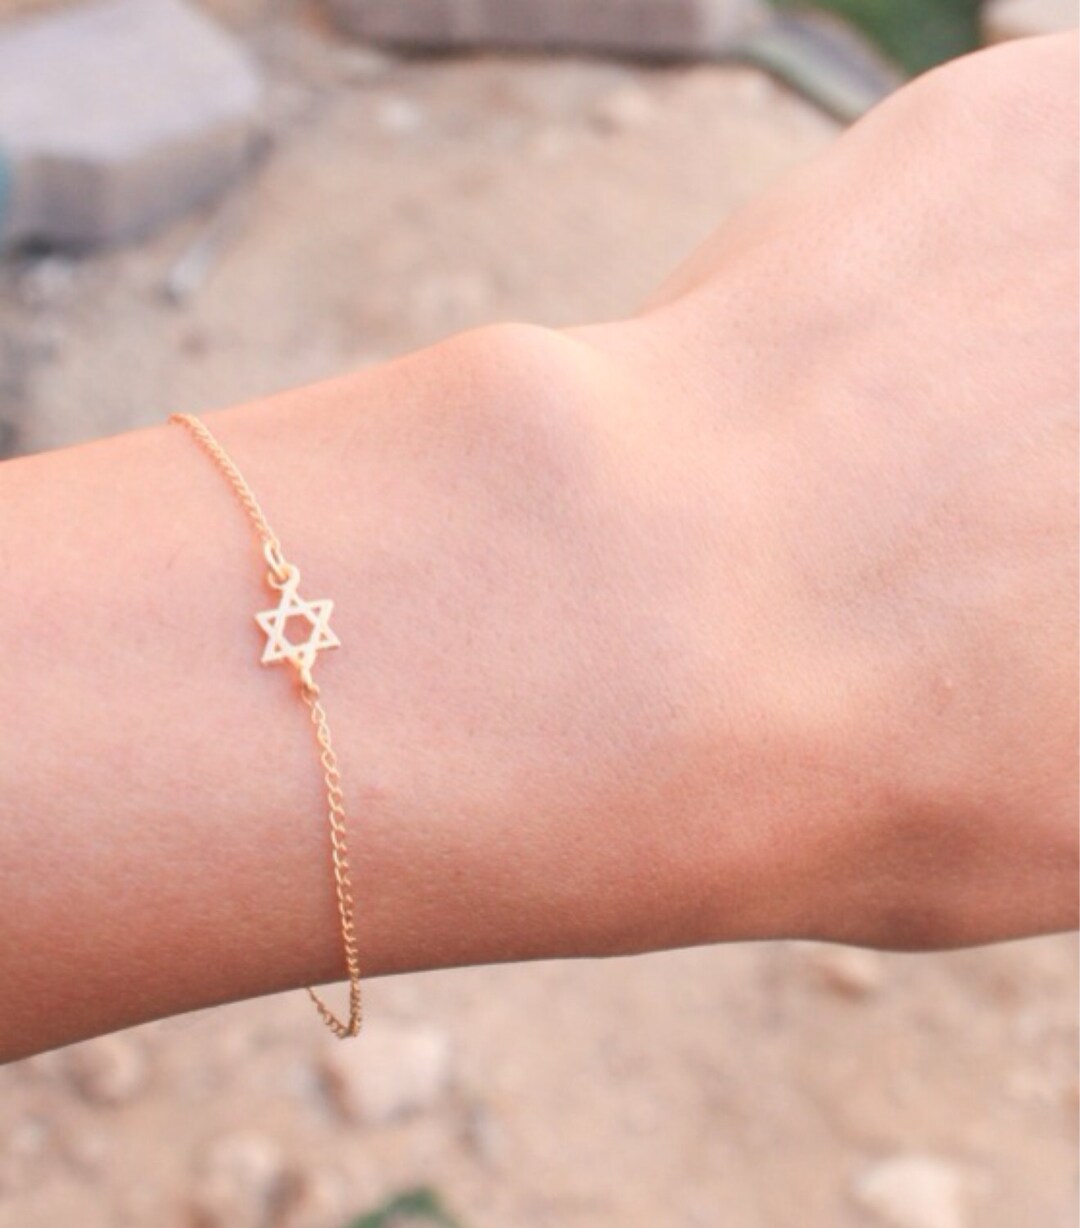  Star David Bracelet in 14k Rose Gold Plate for Women and Girls  : Handmade Products